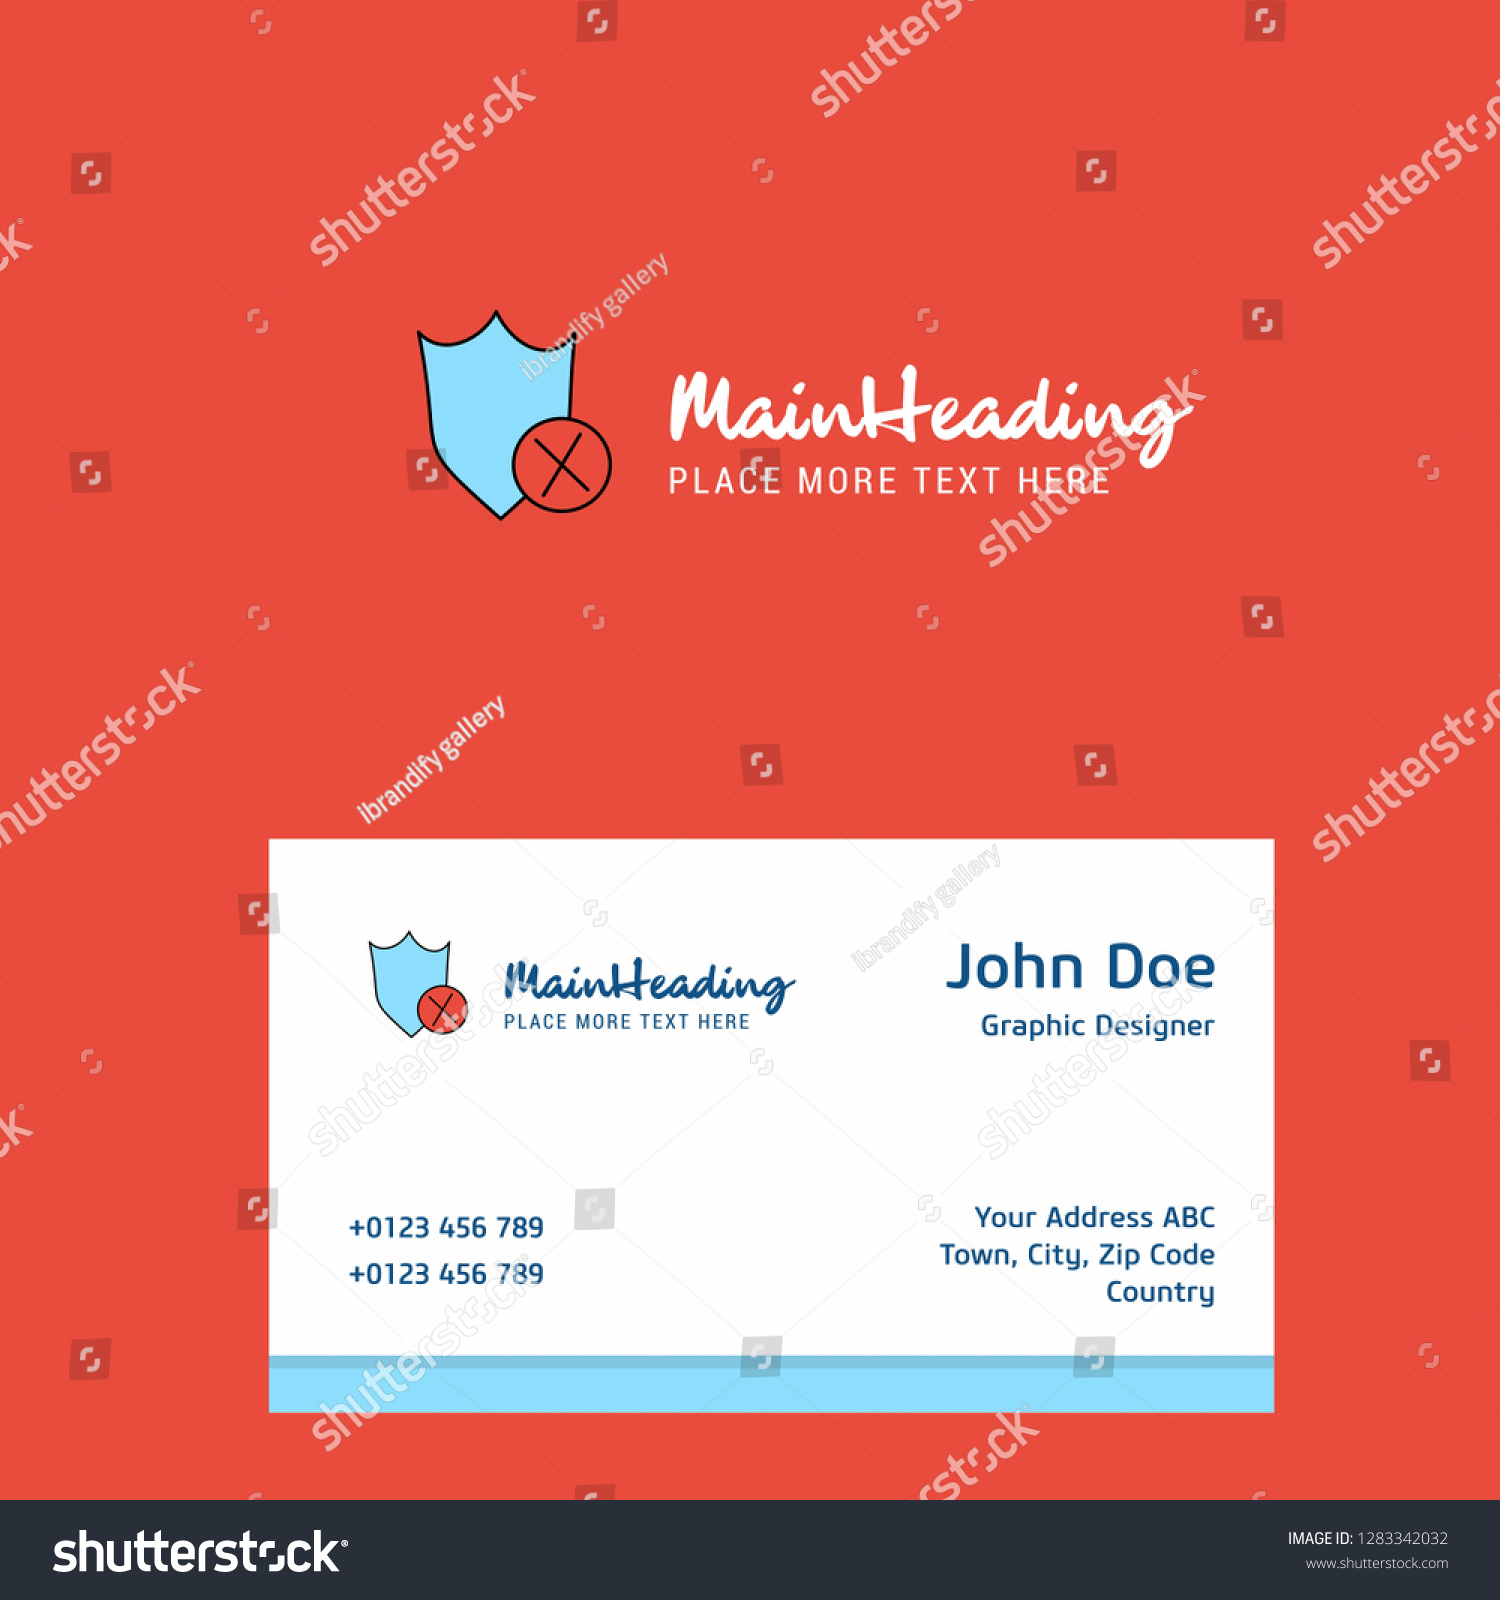 Shield Logo Design Business Card Template Stock Vector Pertaining To Shield Id Card Template